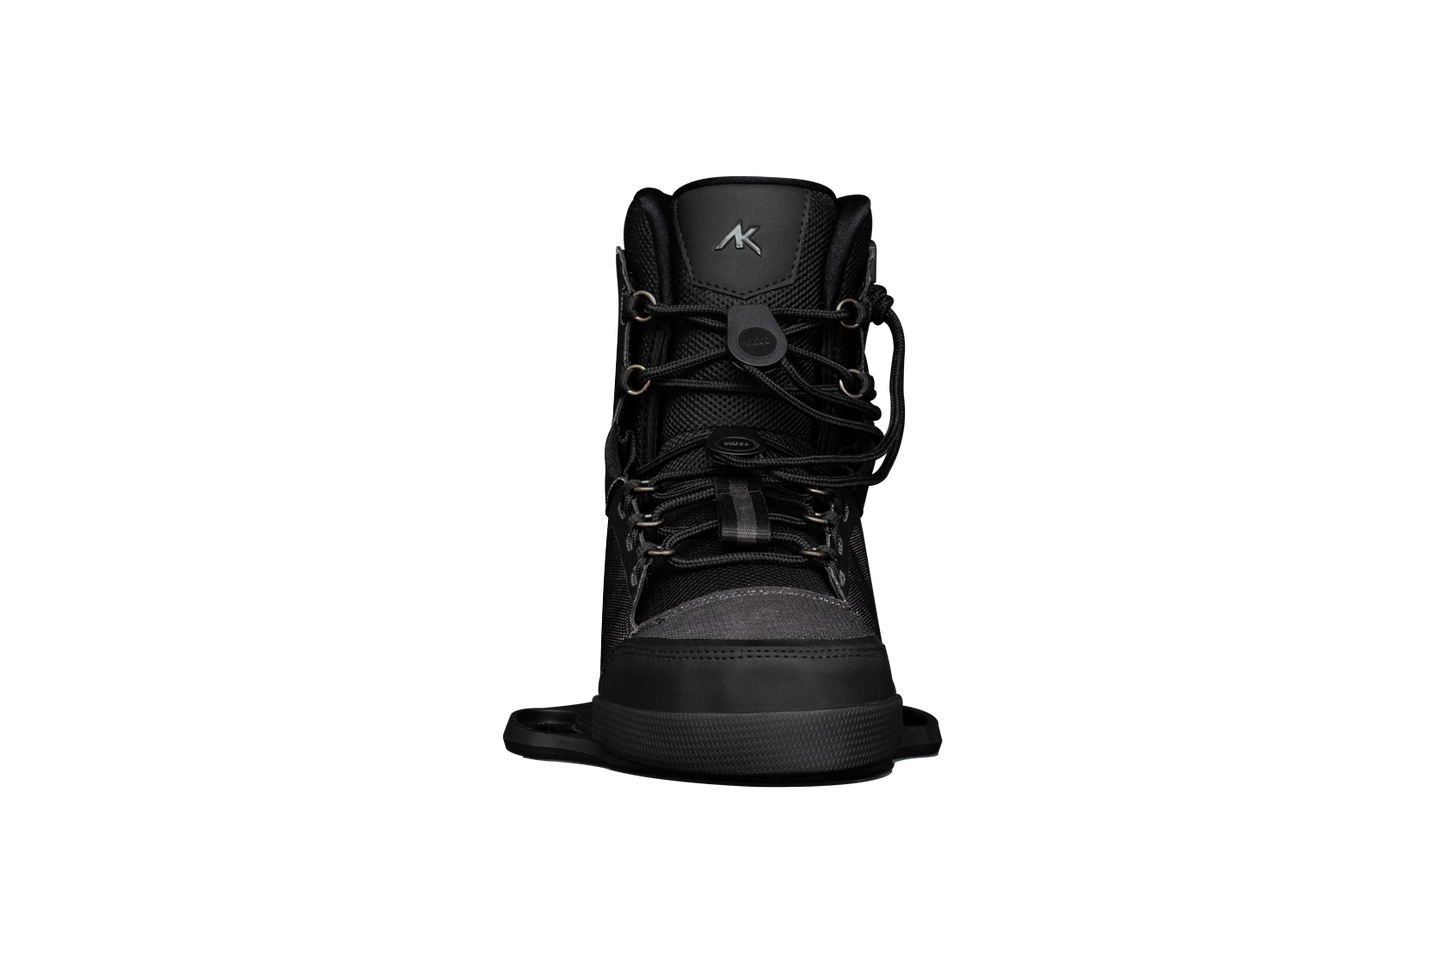 AK Ether Full Boot